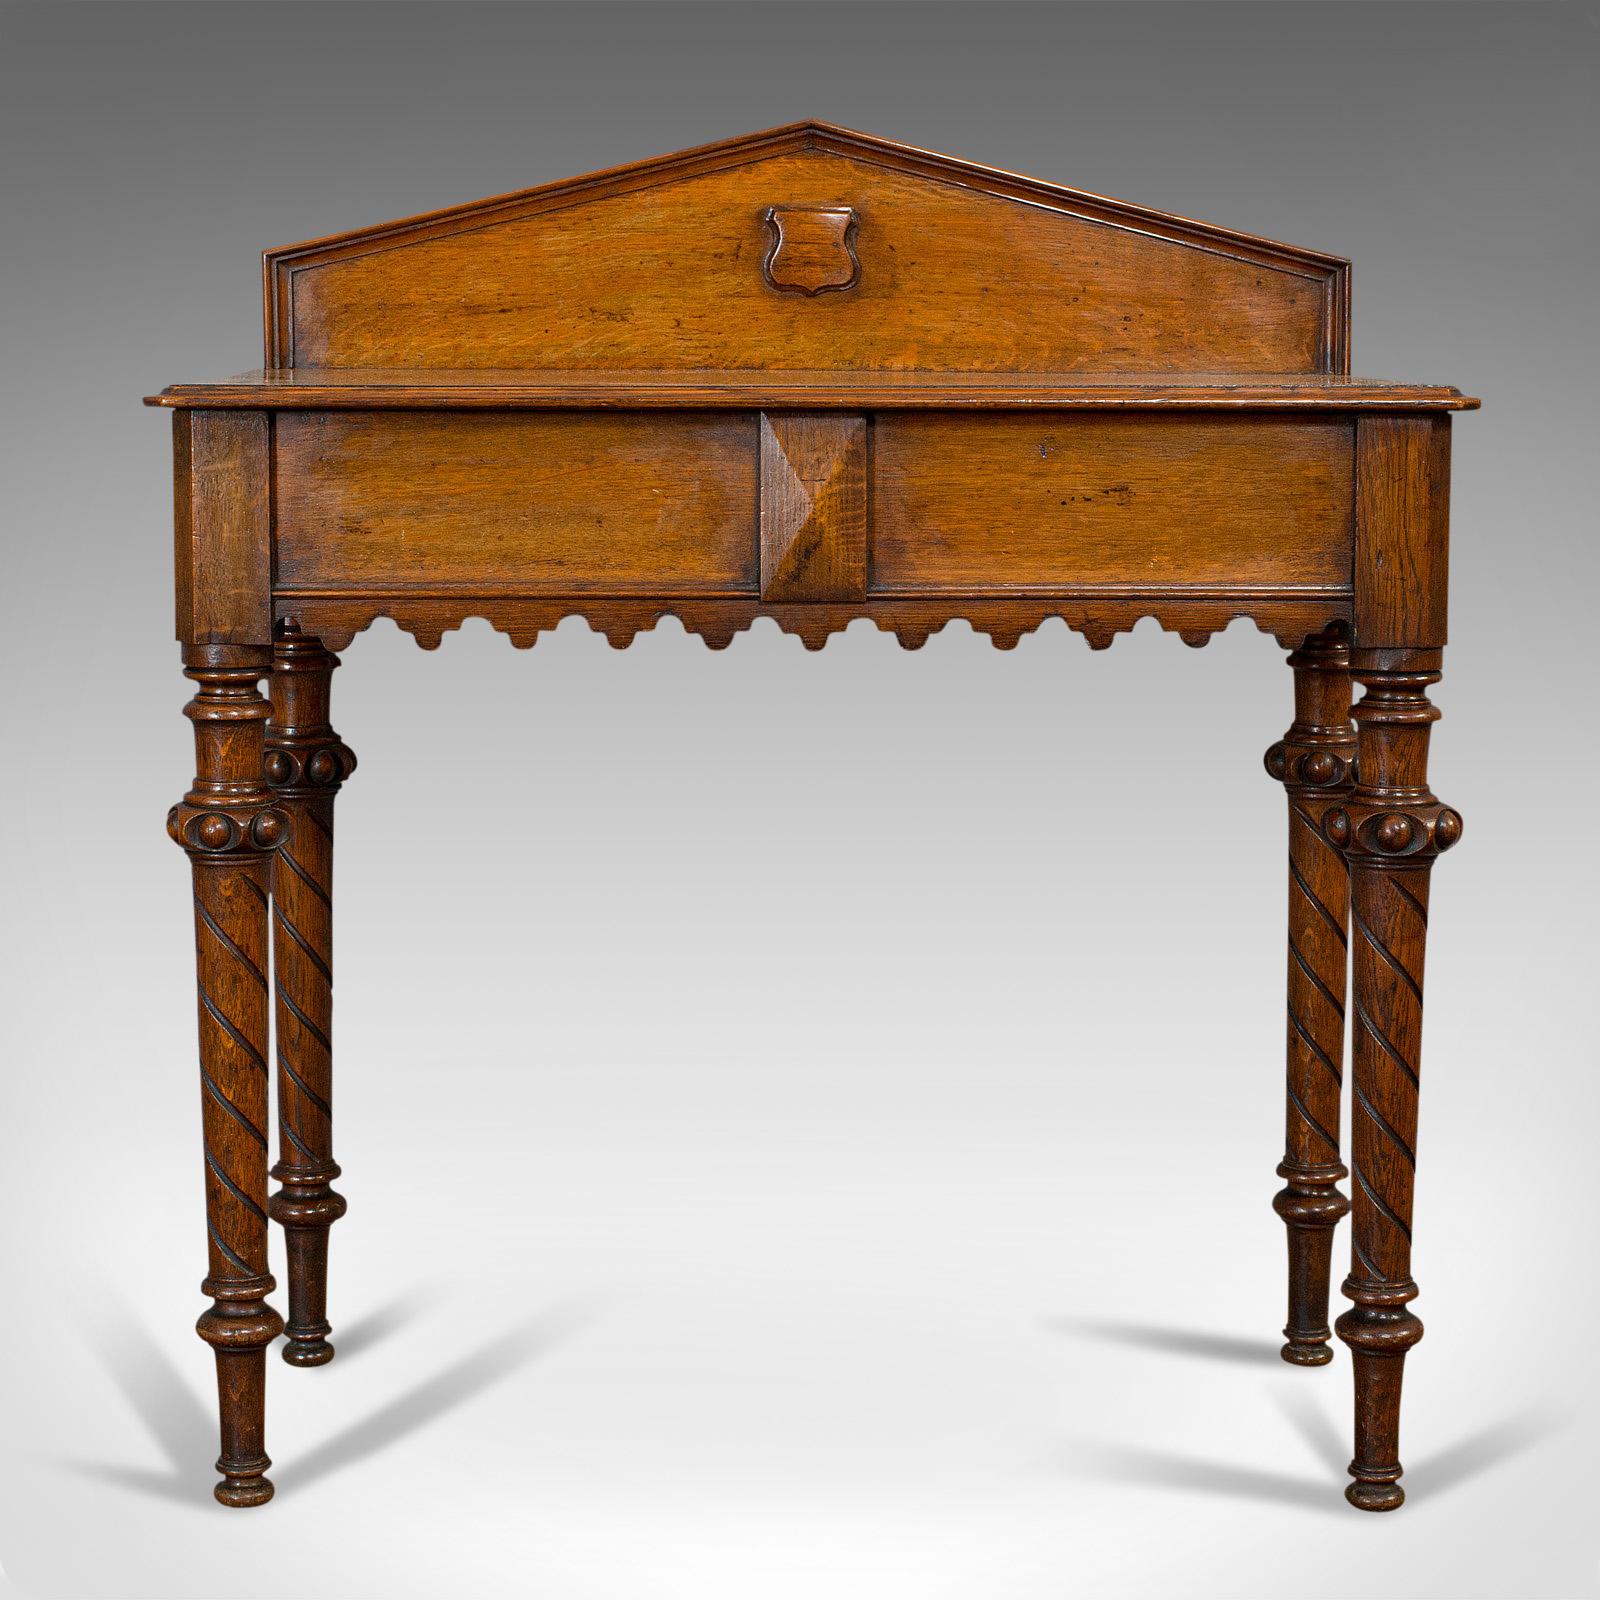 This is an antique hall table. A Scottish, oak Victorian Gothic revival side table or dresser, dating to the mid-19th century, circa 1860.

Appealing Scots table with Gothic revival taste
Displays a desirable aged patina
Select oak with